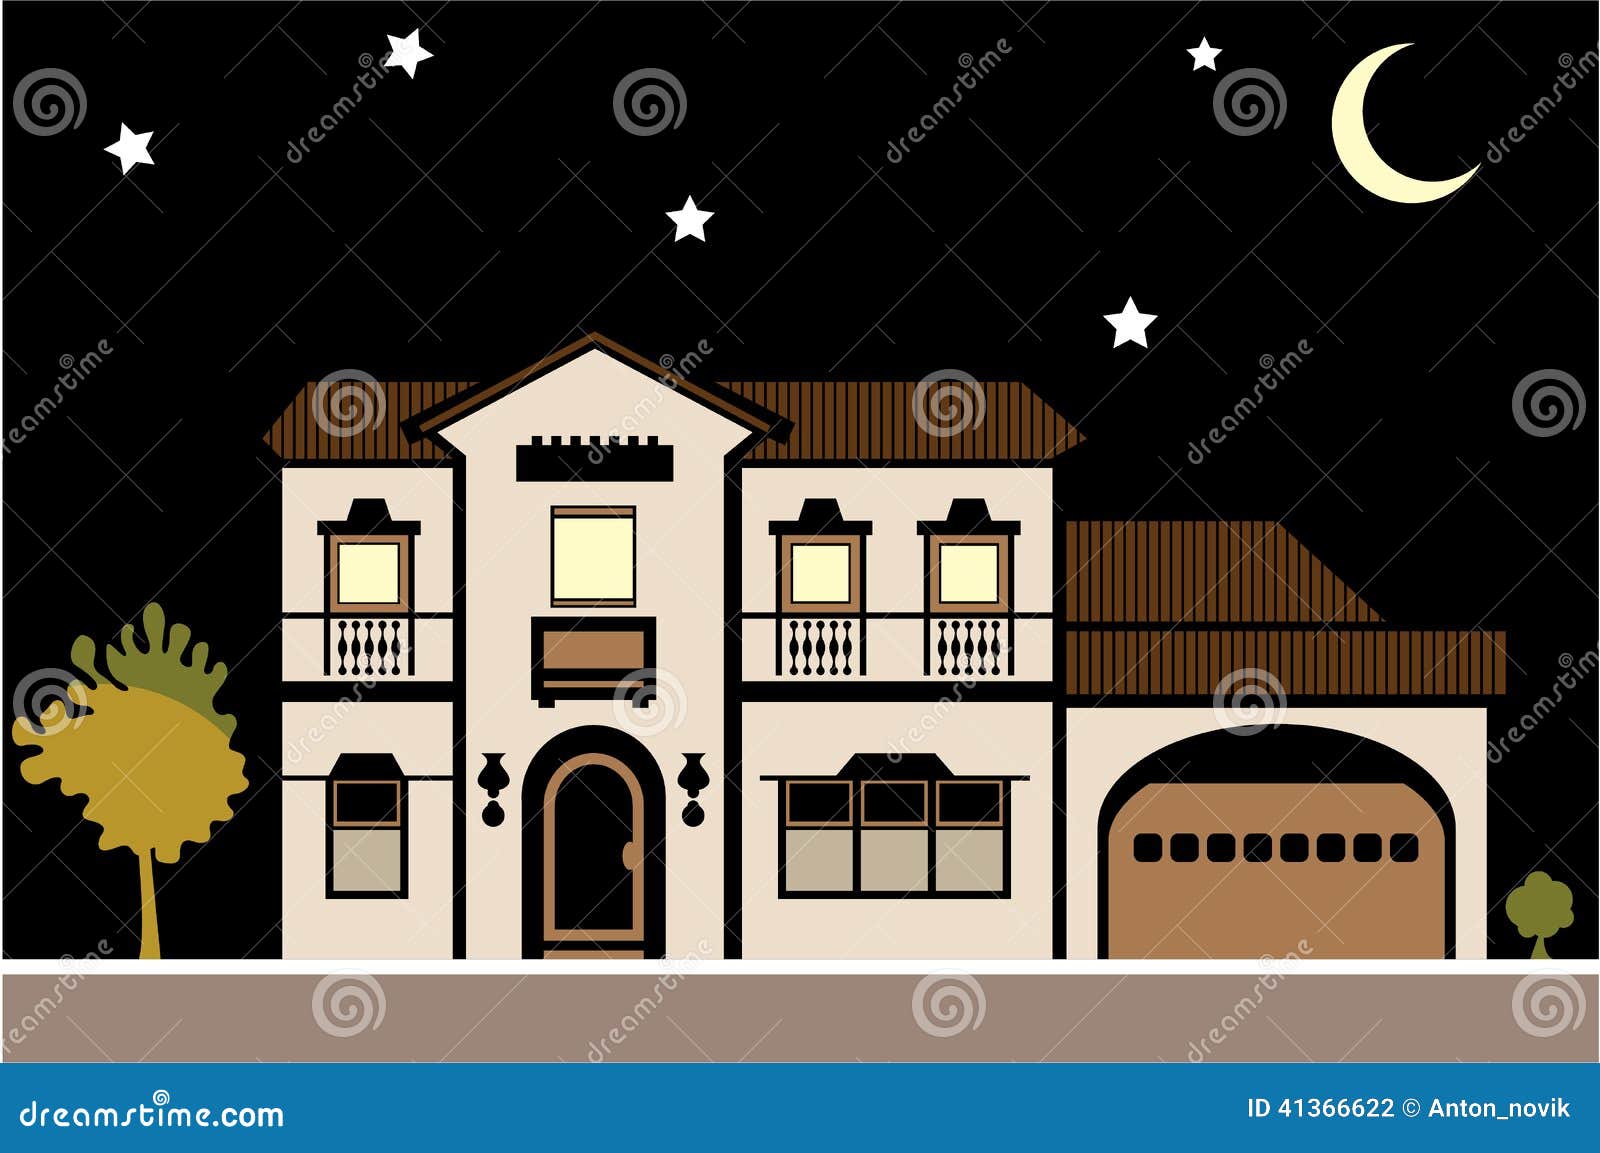 house at night clipart - photo #3